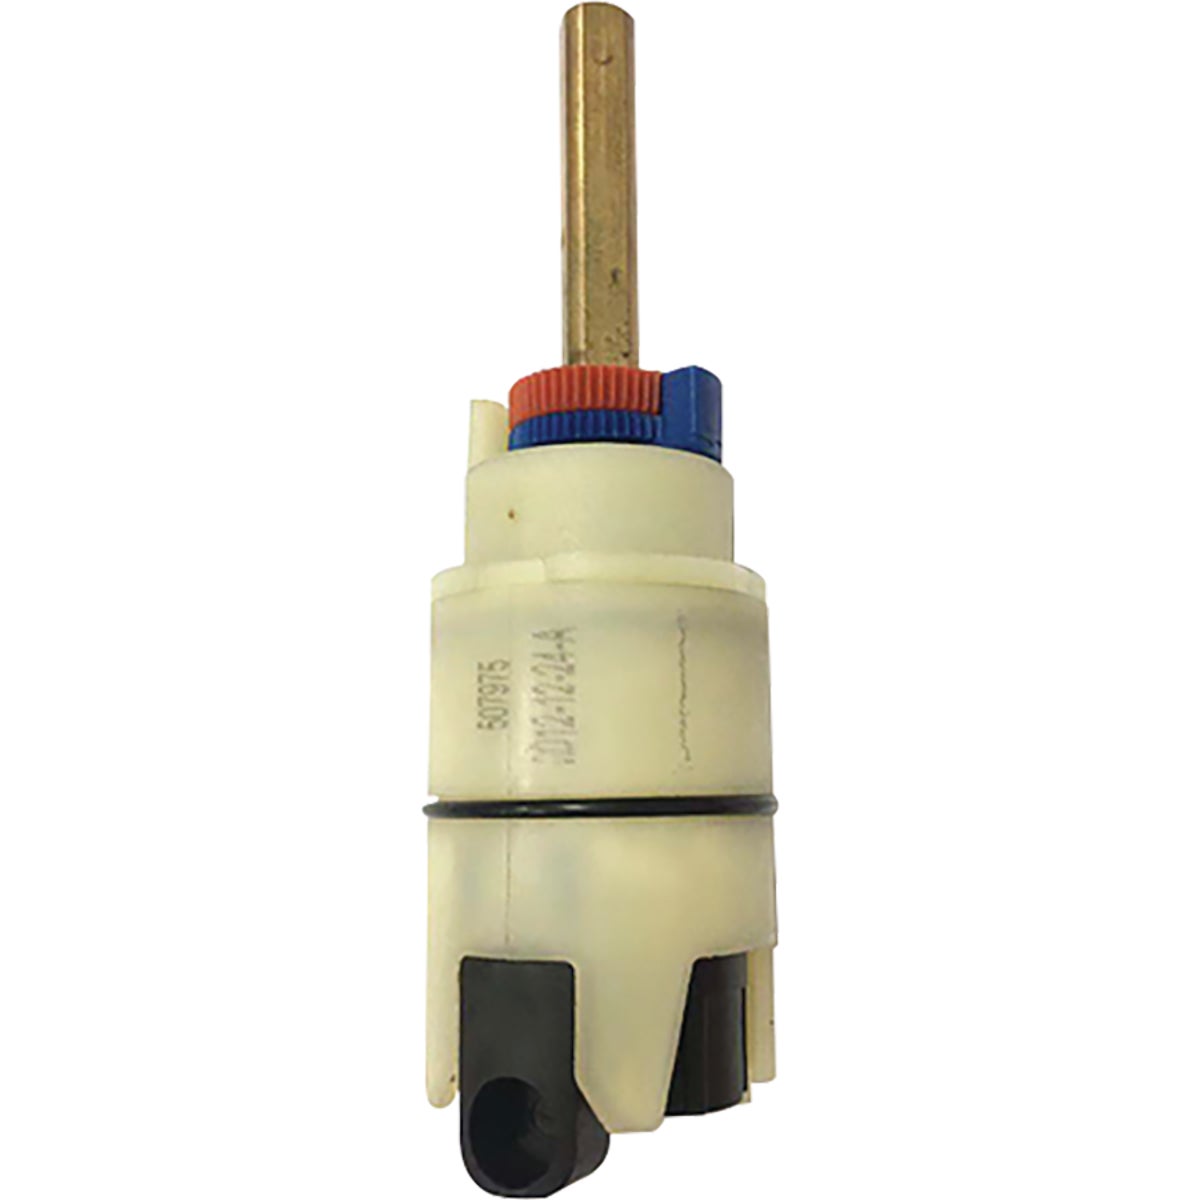 Item 404498, Washerless cartridge for the repair of leaking tub and shower faucets